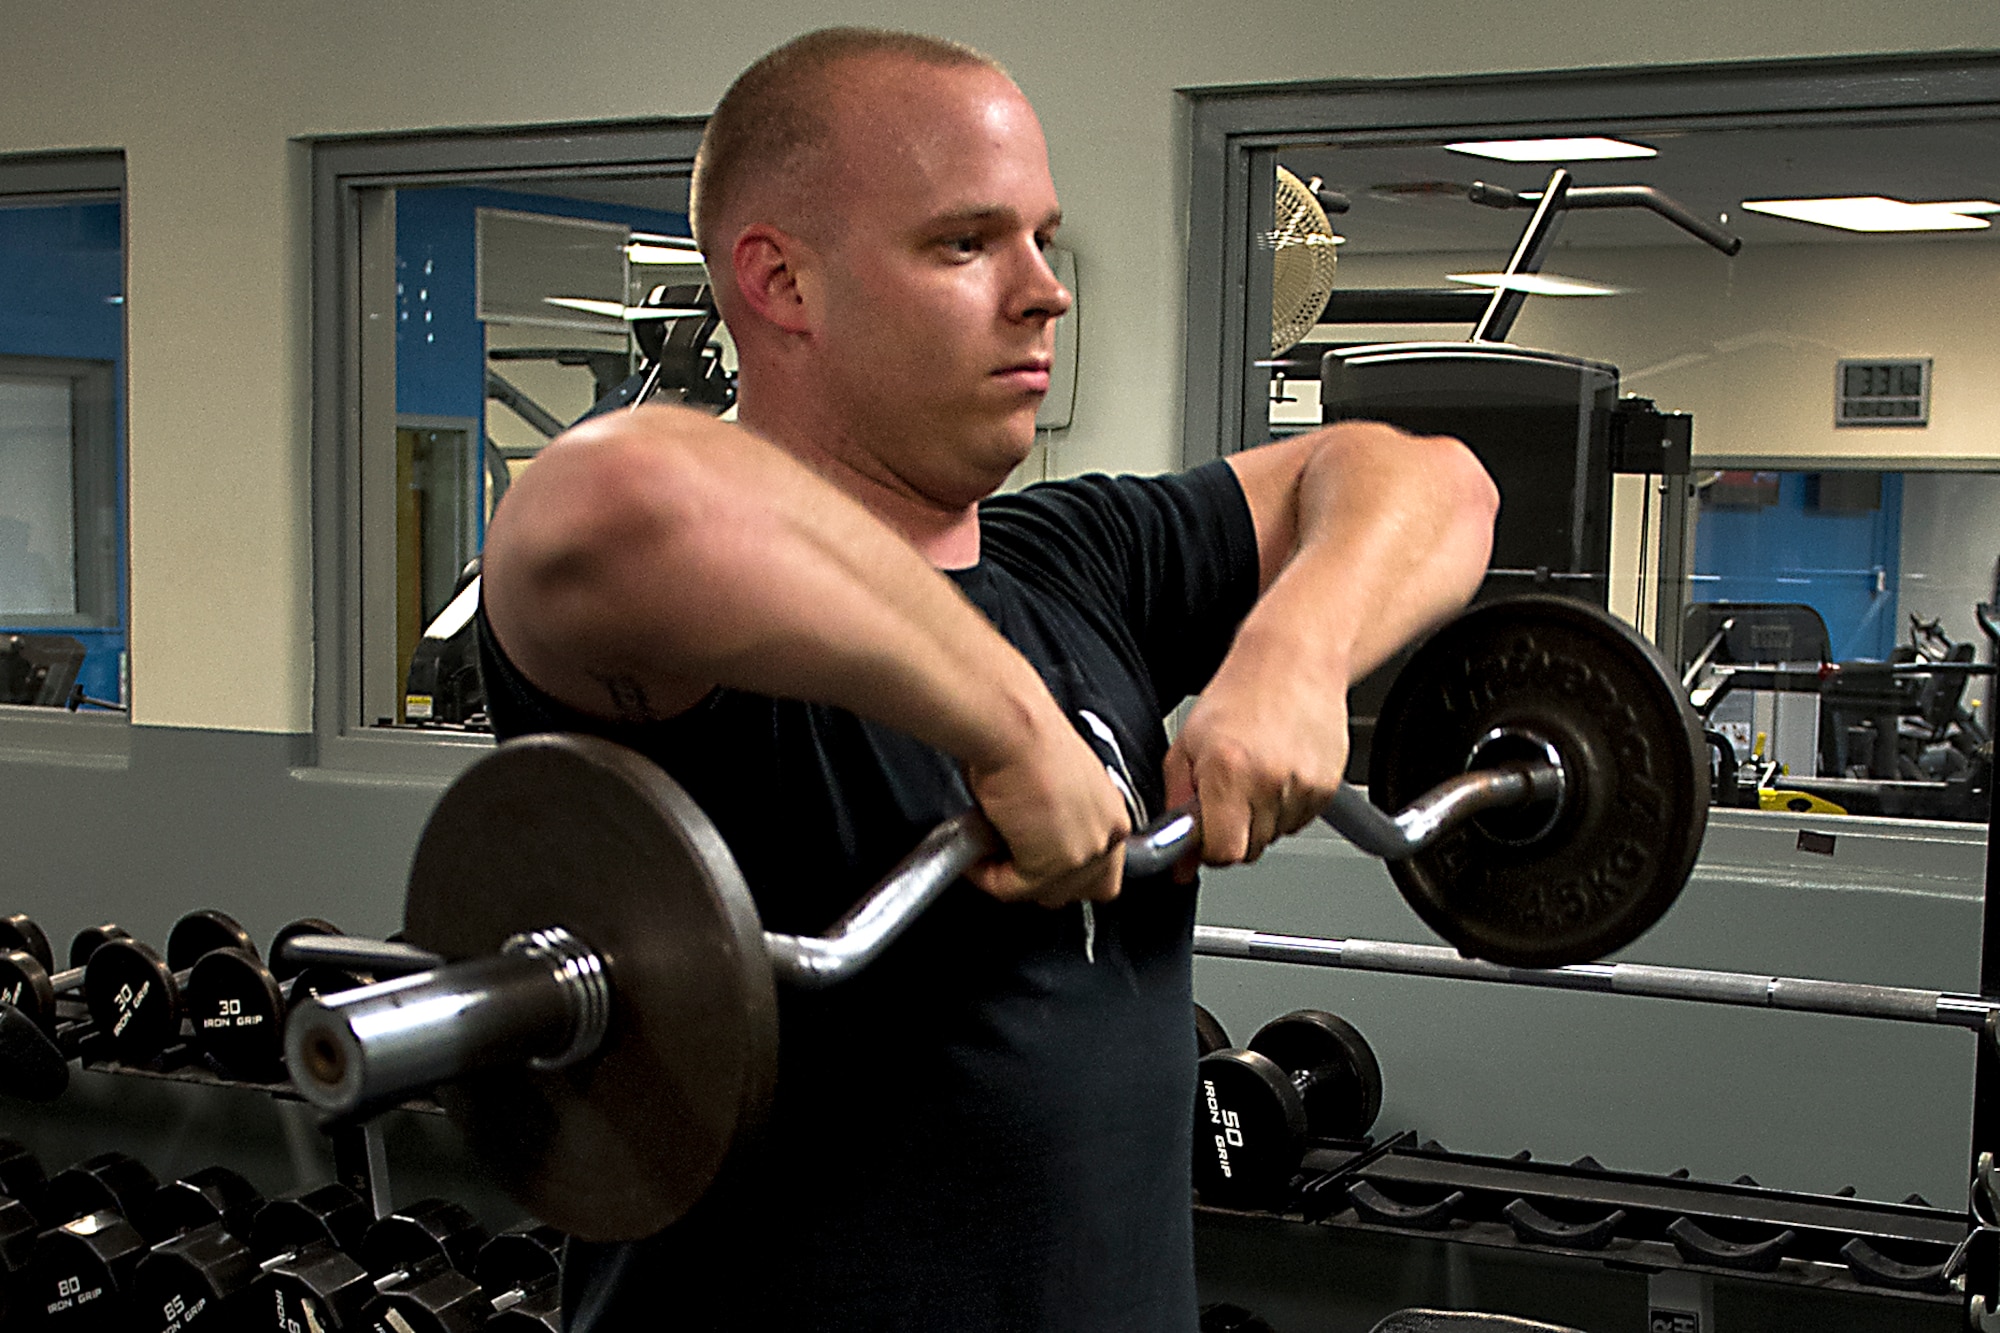 Marine Staff Sgt. Richard Kennedy, an admin chief assigned to Detachment 1, Communications Company, Combat Logistics Regiment 45, 4th Marine Logistics Group, lifts weights at the fitness center April 20, 2016 at Grissom Air Reserve Base, Ind. The fitness center will be transitioning to a 24-hour schedule for common access card holders this summer. (U.S. Air Force photo/Senior Airman Dakota Bergl)